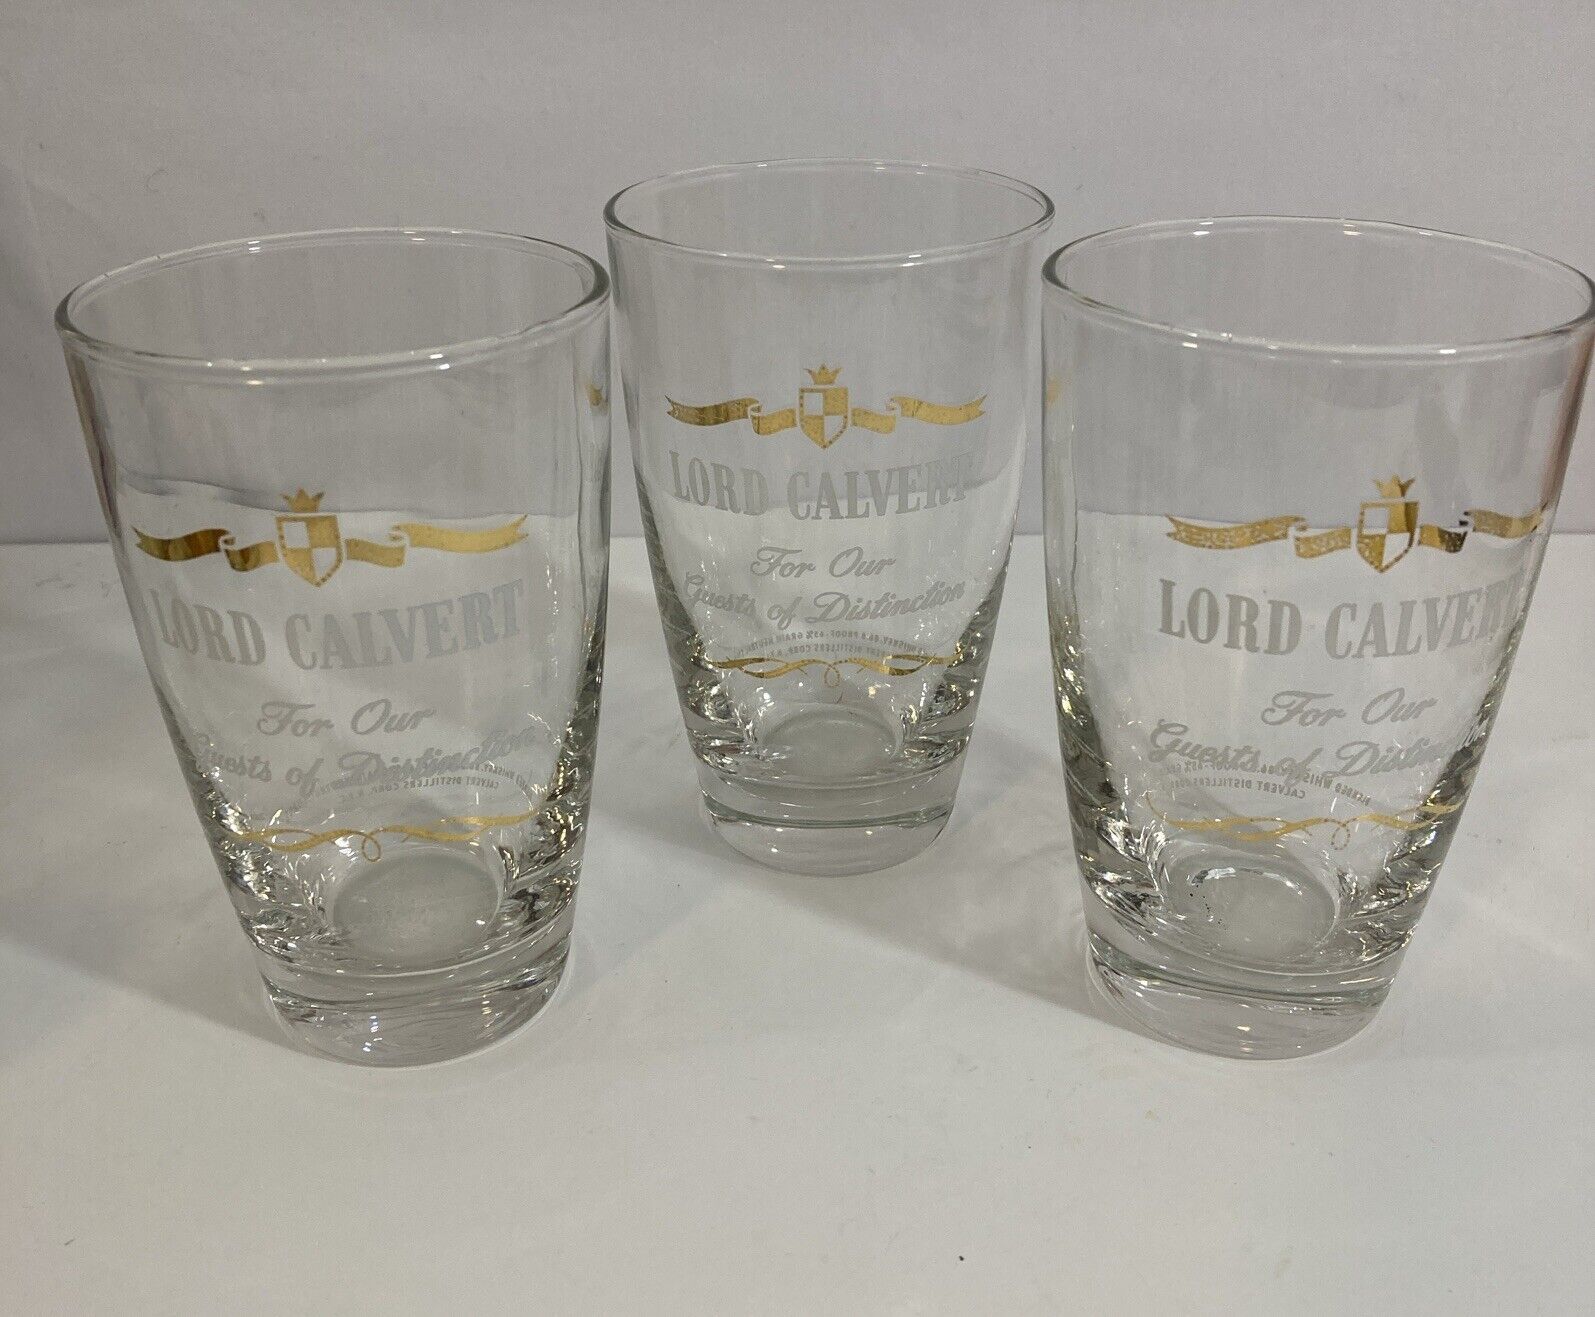 Vintage Rare Lord Calvert Whiskey Glasses “ For The Guest Of Distinction” 5”  K1